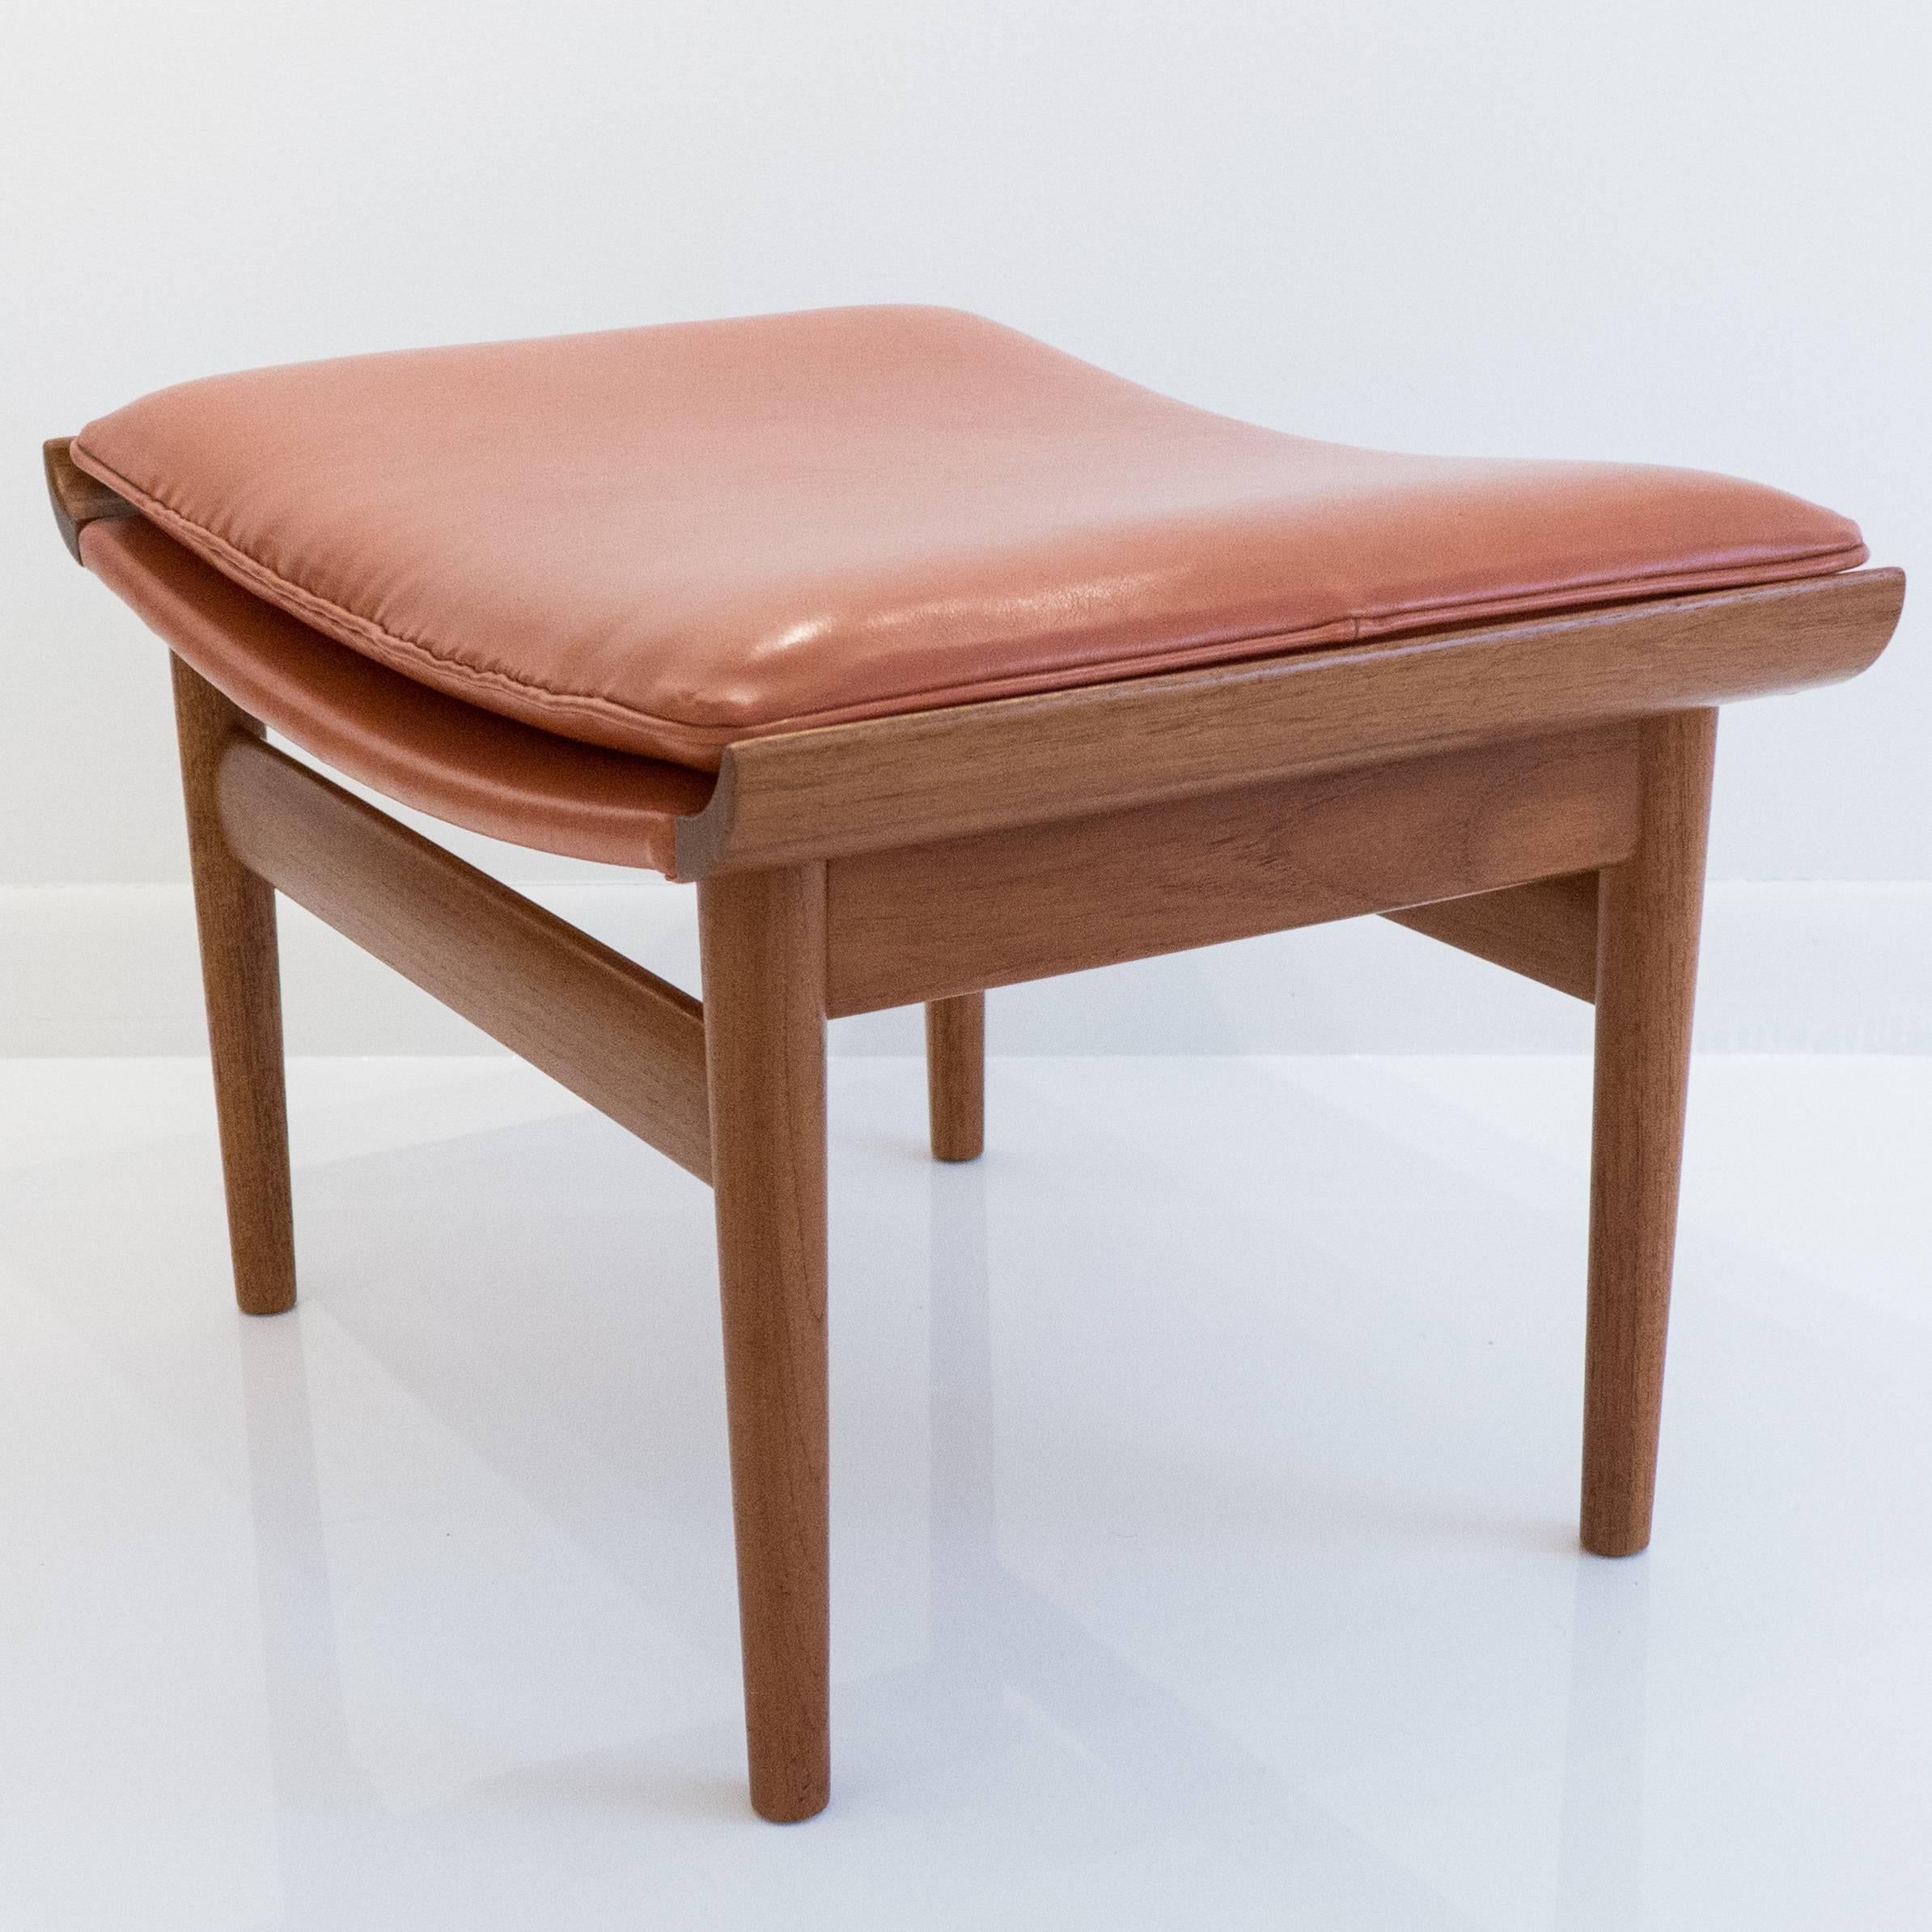 Teak ottoman with leather cushion designed by Finn Juhl and produced by France & Sons, circa 1960s. This ottoman was intended as a counterpart to his 